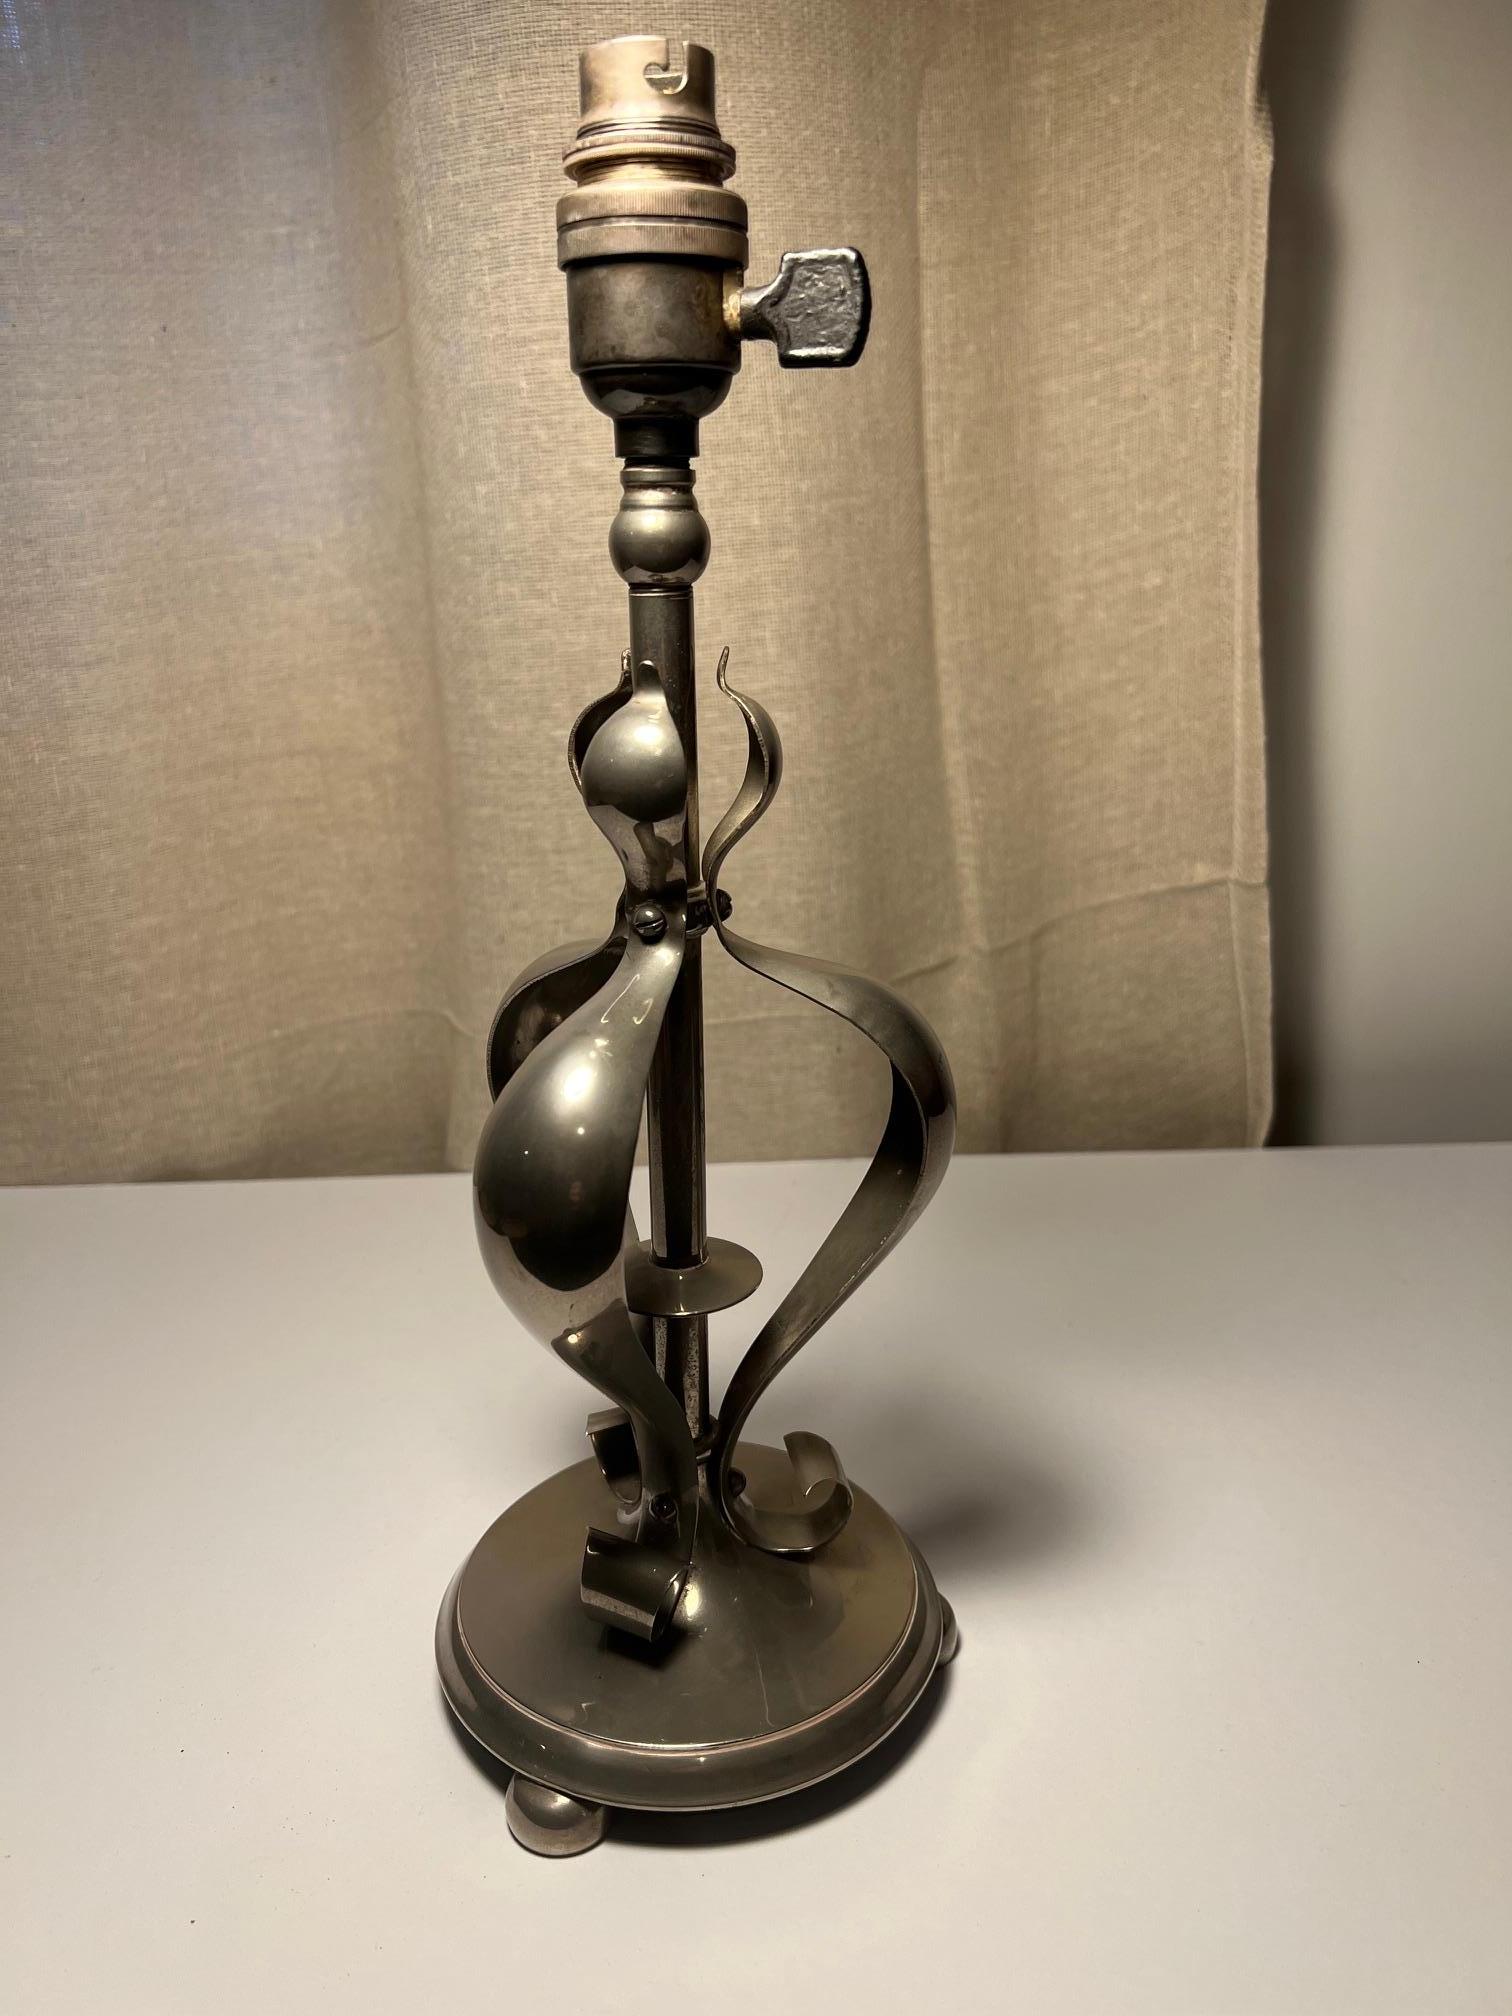 Nickel plated brass arts & crafts table lamp in the style of the Birmingham school of arts and crafts.

Could possibly be an early piece by the general electric company.

Currently not wired, can be wired upon request with pending details, this will